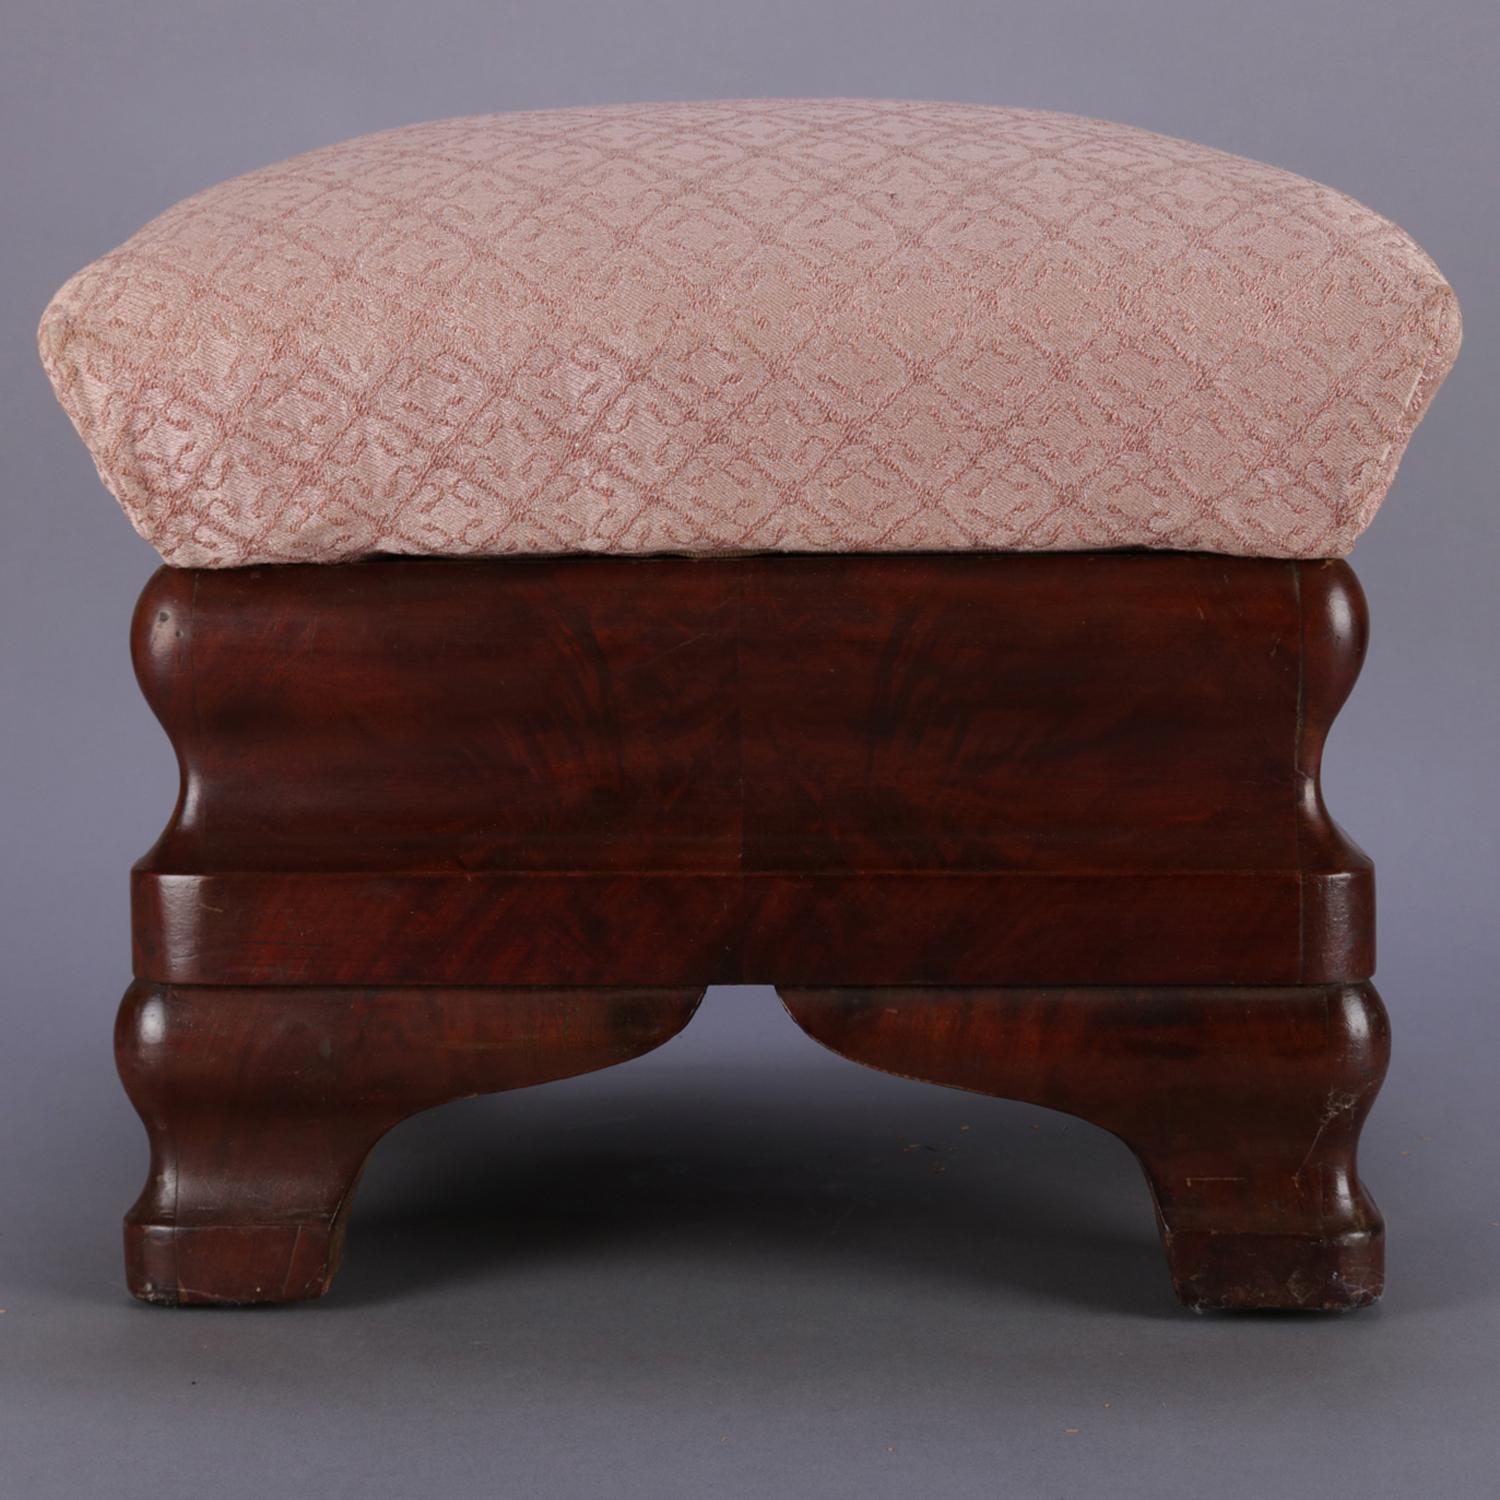 19th Century Pair of Antique American Empire Ogee Flame Mahogany Footstools with Storage